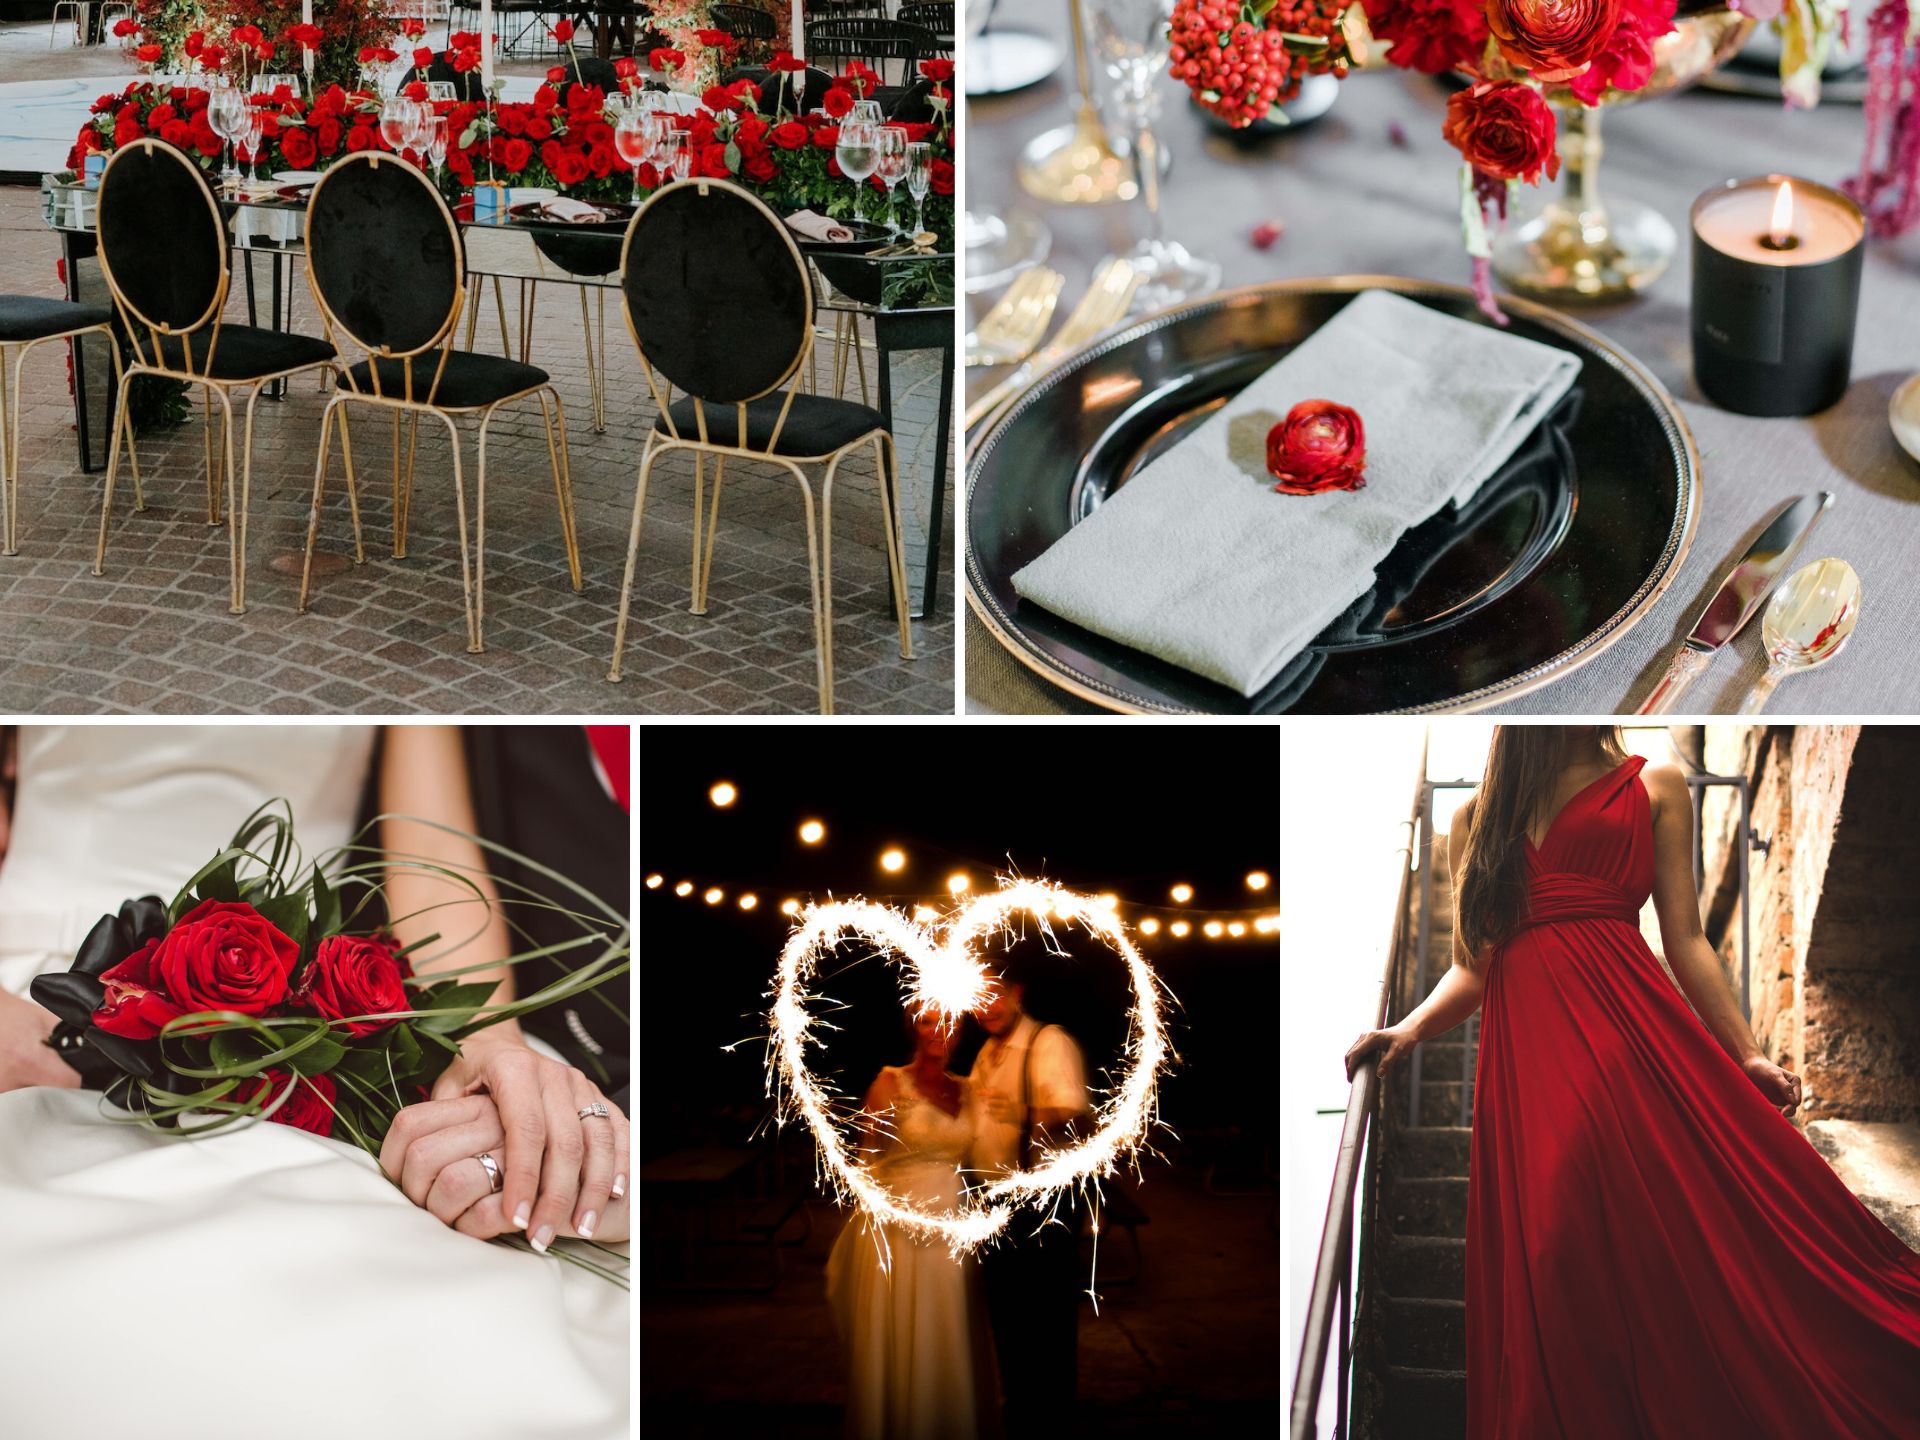 A photo collage with red and black wedding color ideas.